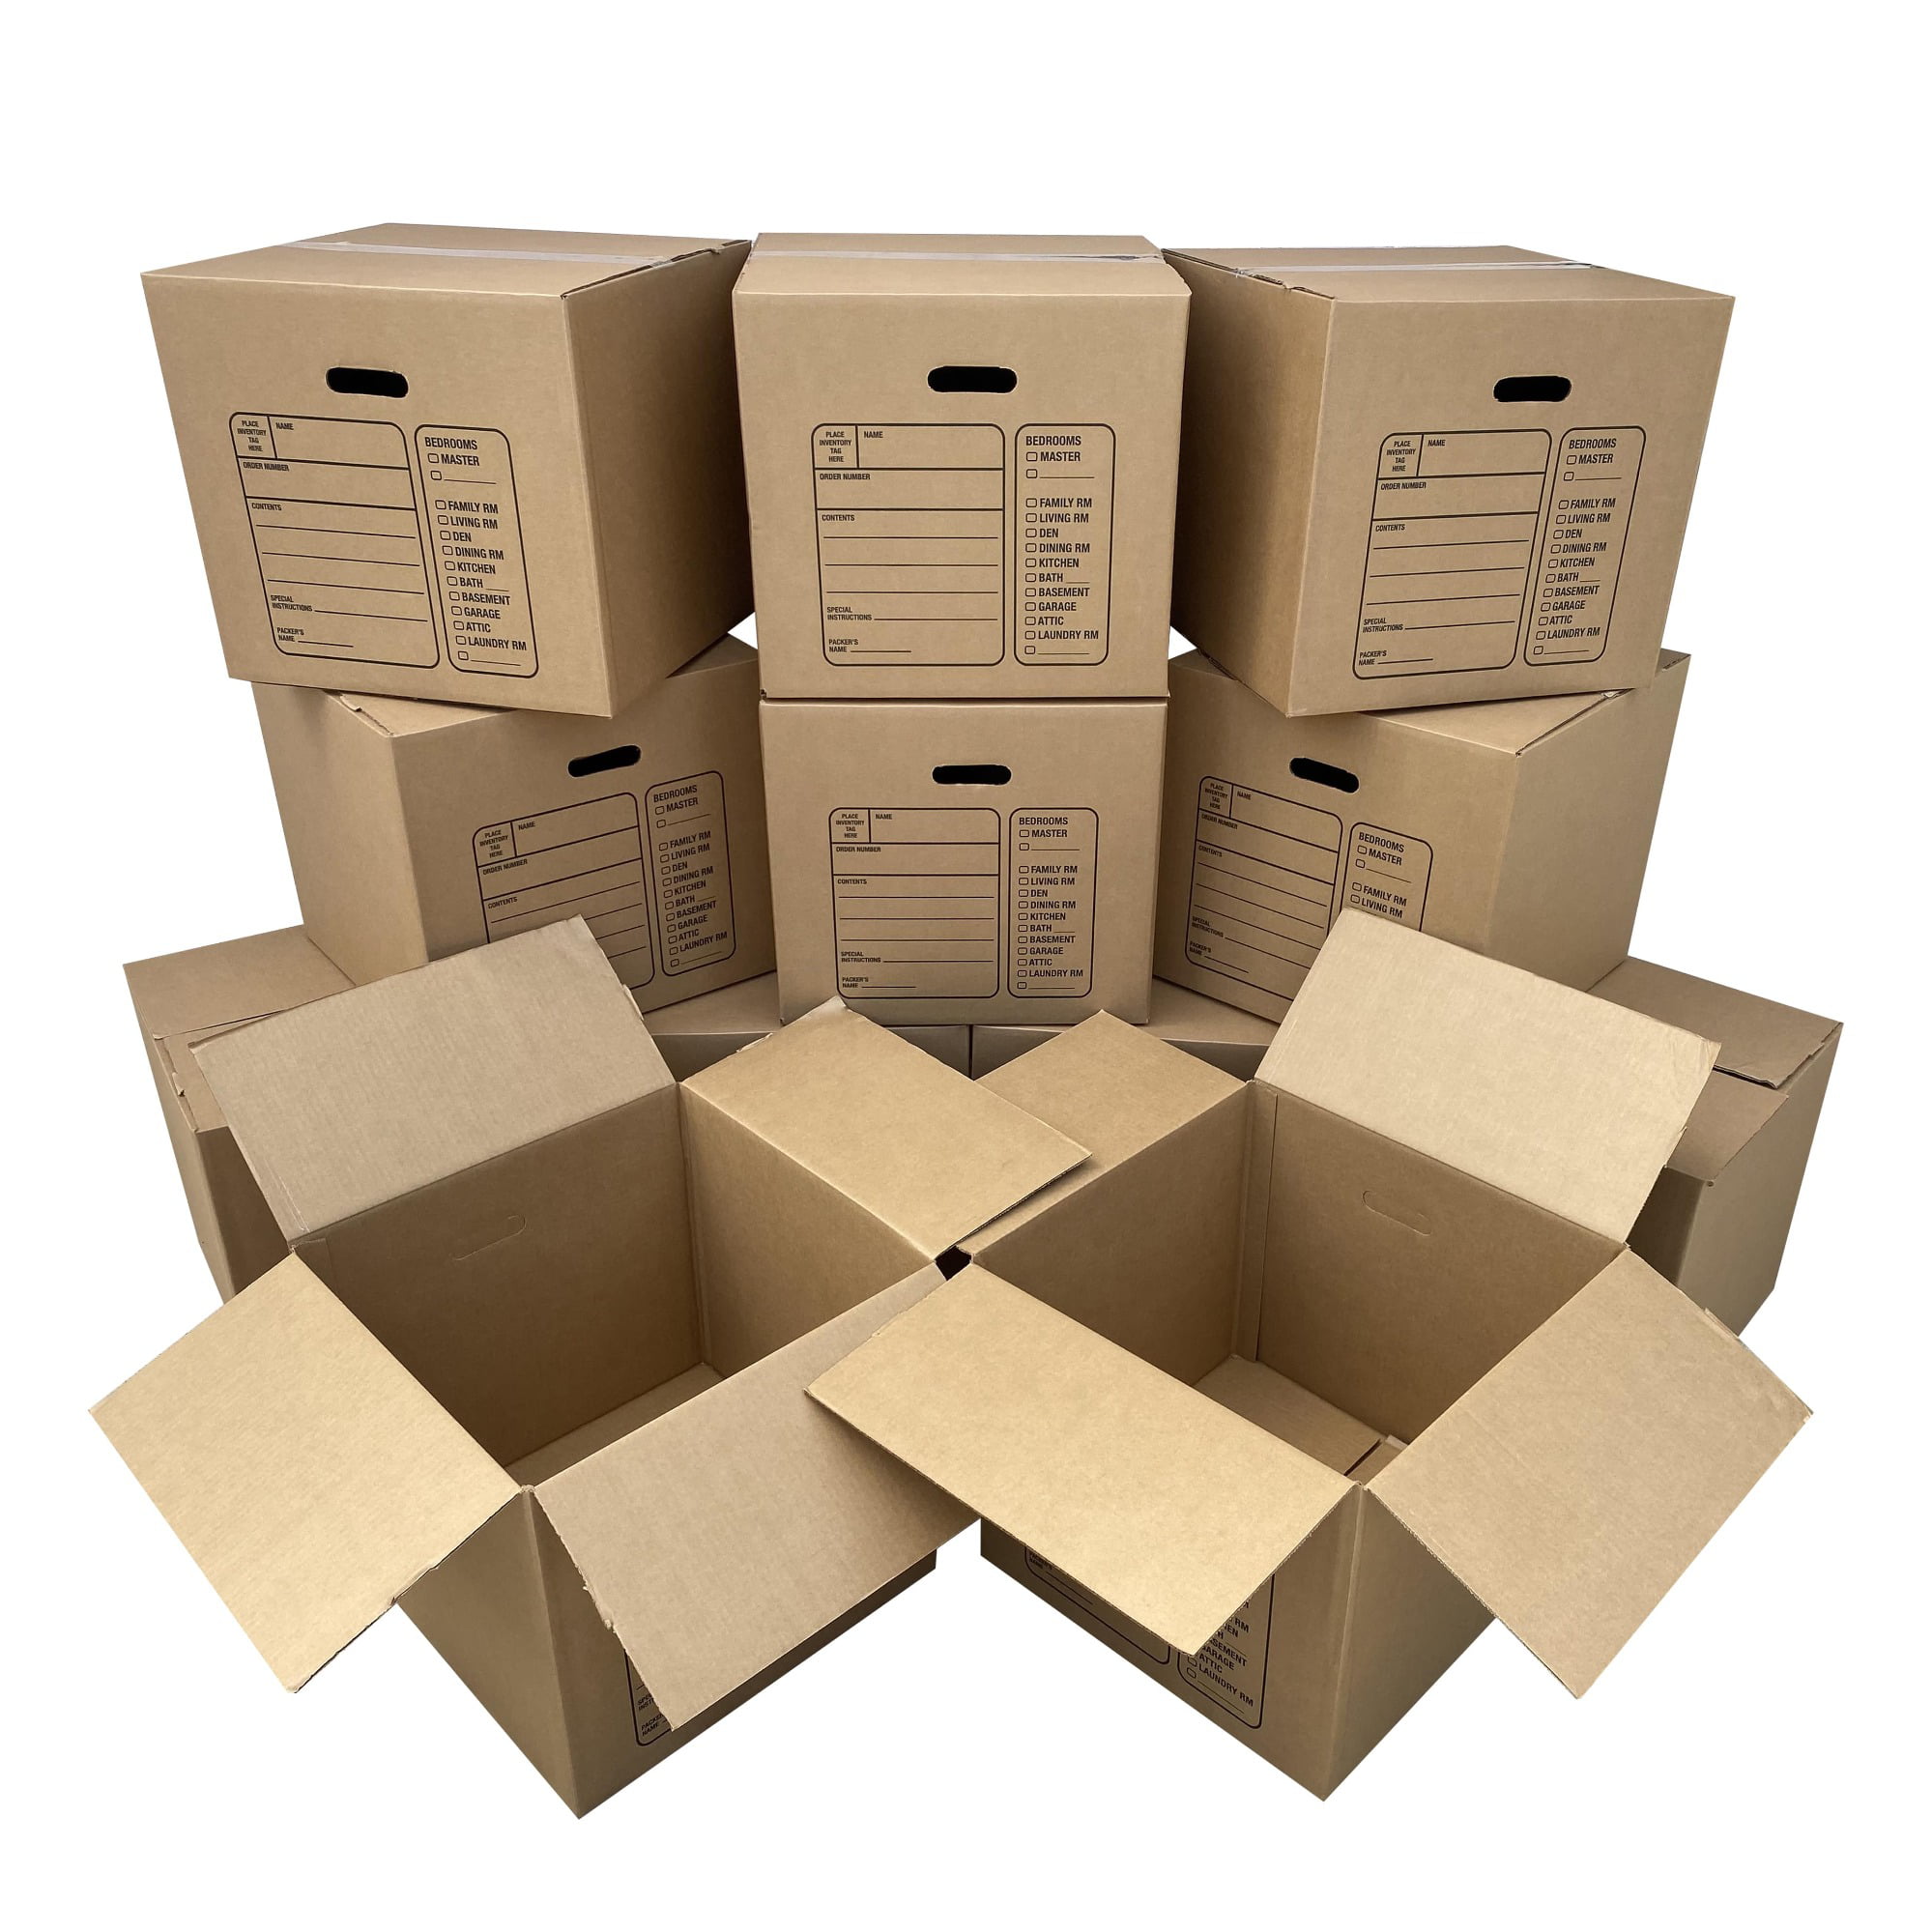 Cardboard wardrobe boxes for moving